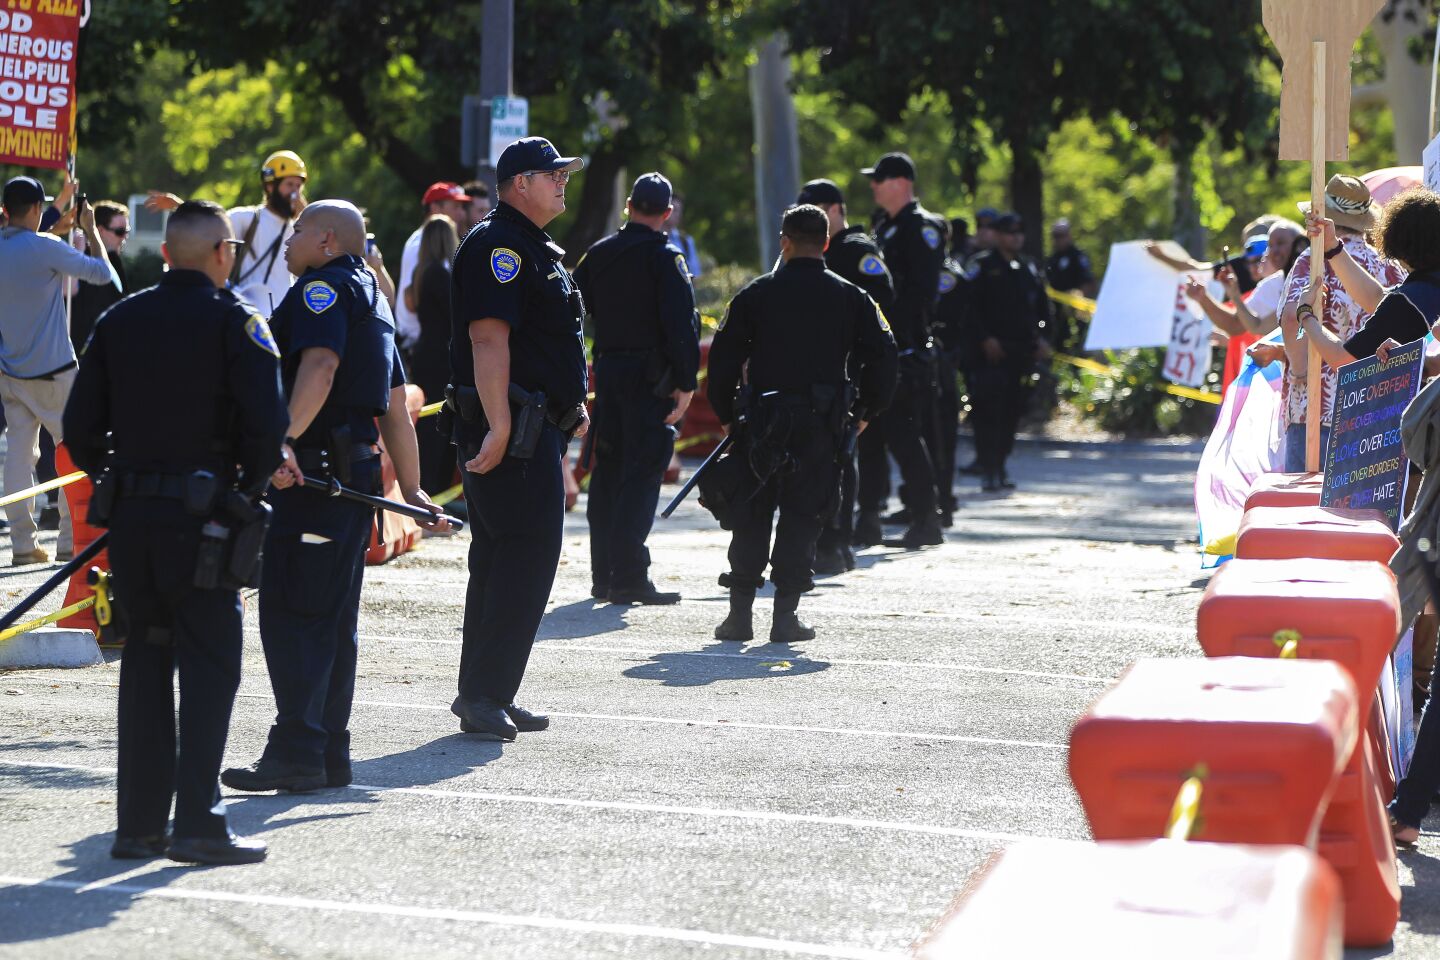 Chula Vista police stand between supporters of the Drag Queen Story Hour and protesters against the story hour at the Chula Vista Public Library Civic Center Branch on Tuesday, September 10, 2019 in Chula Vista, California.